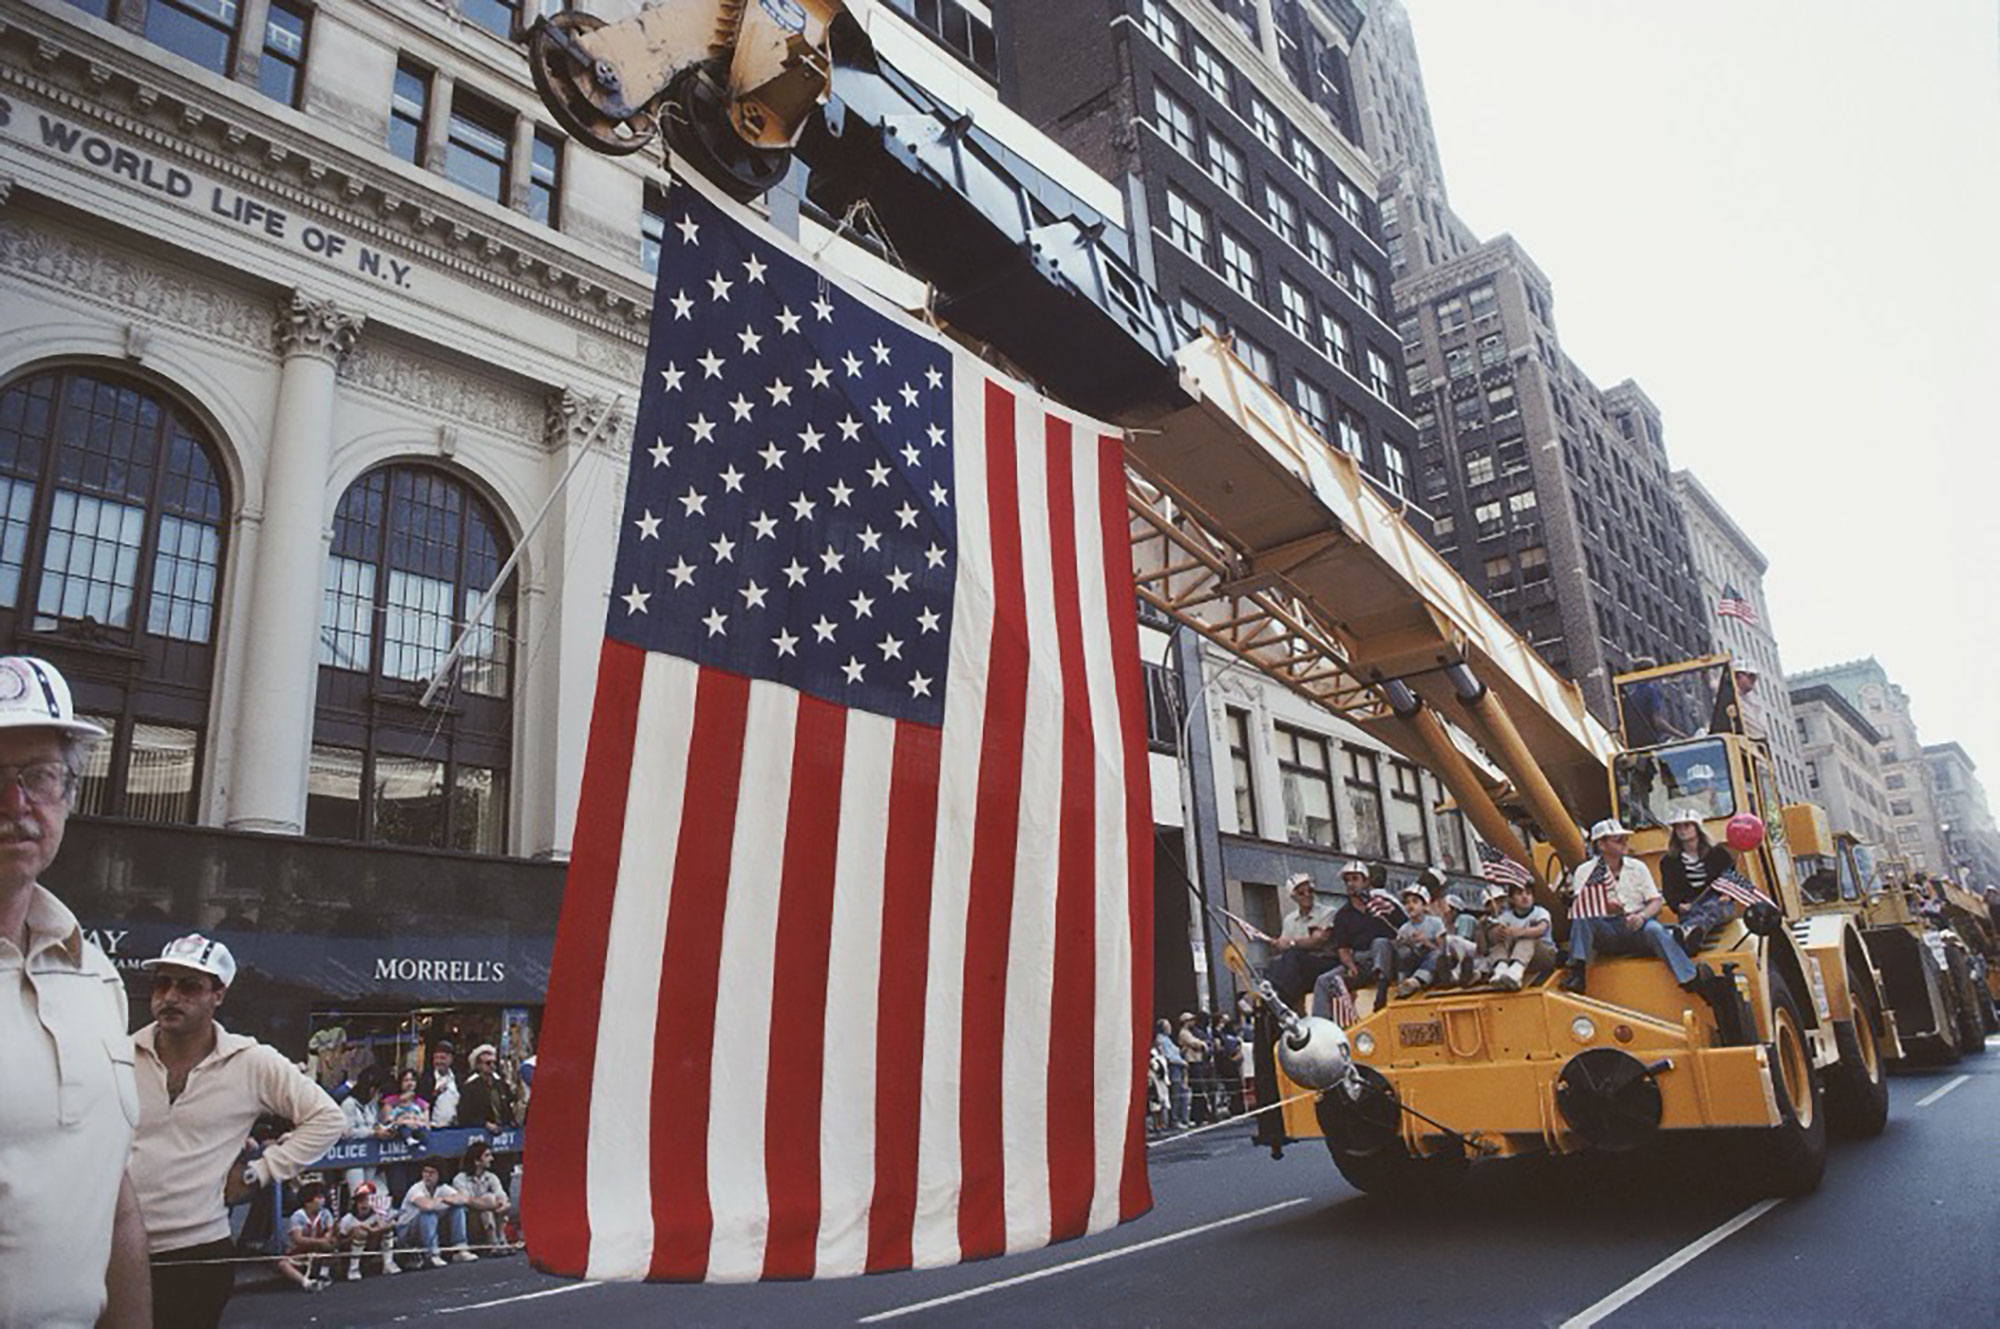 A large American flag is suspended from a crane in a Labor Day parade in New York City, 1982. Barbara Alper — Getty Images